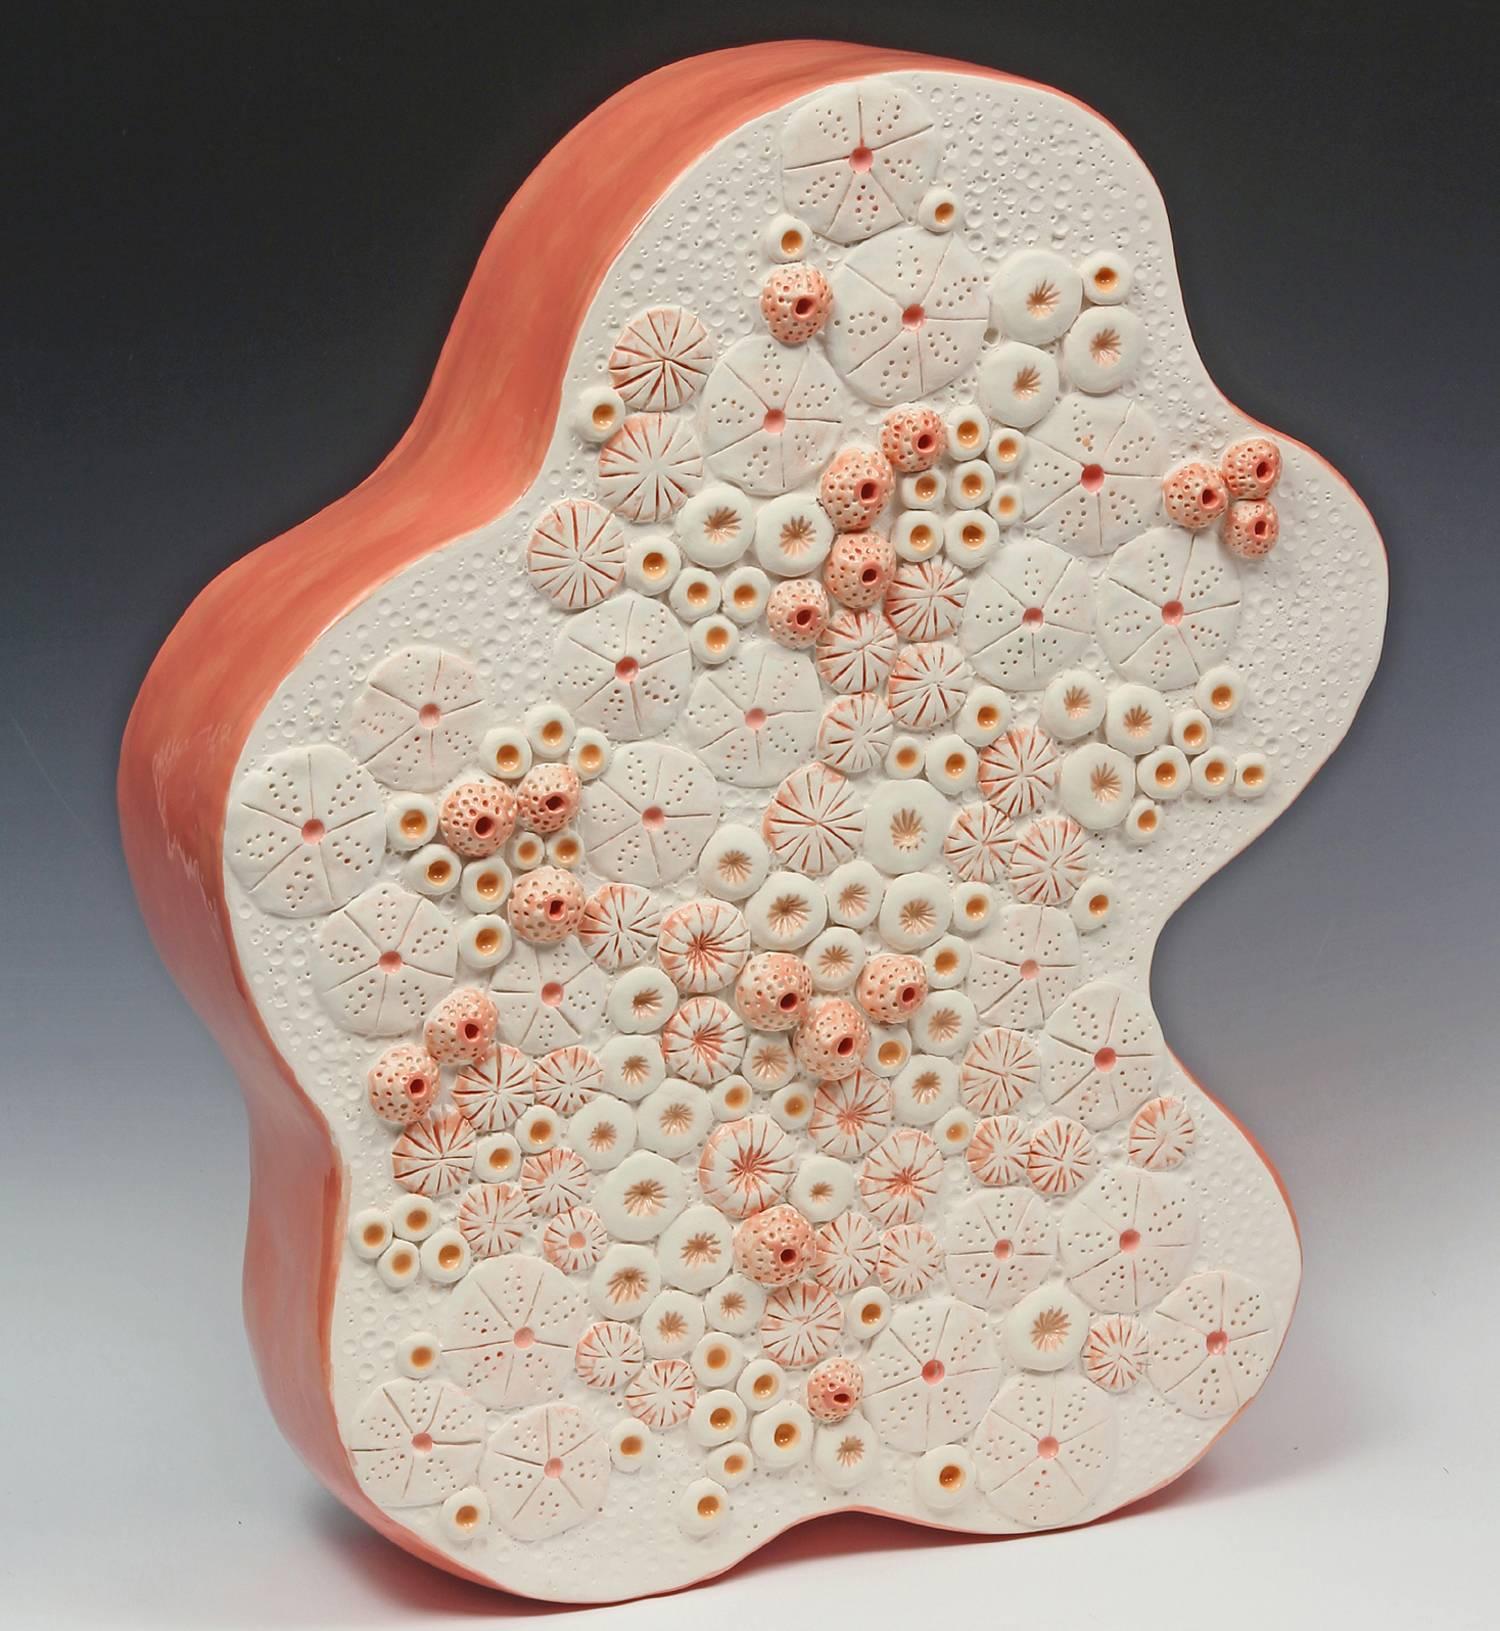 Jane B. Grimm Abstract Sculpture - Coral XVIII / coral inspired ceramic sculpture